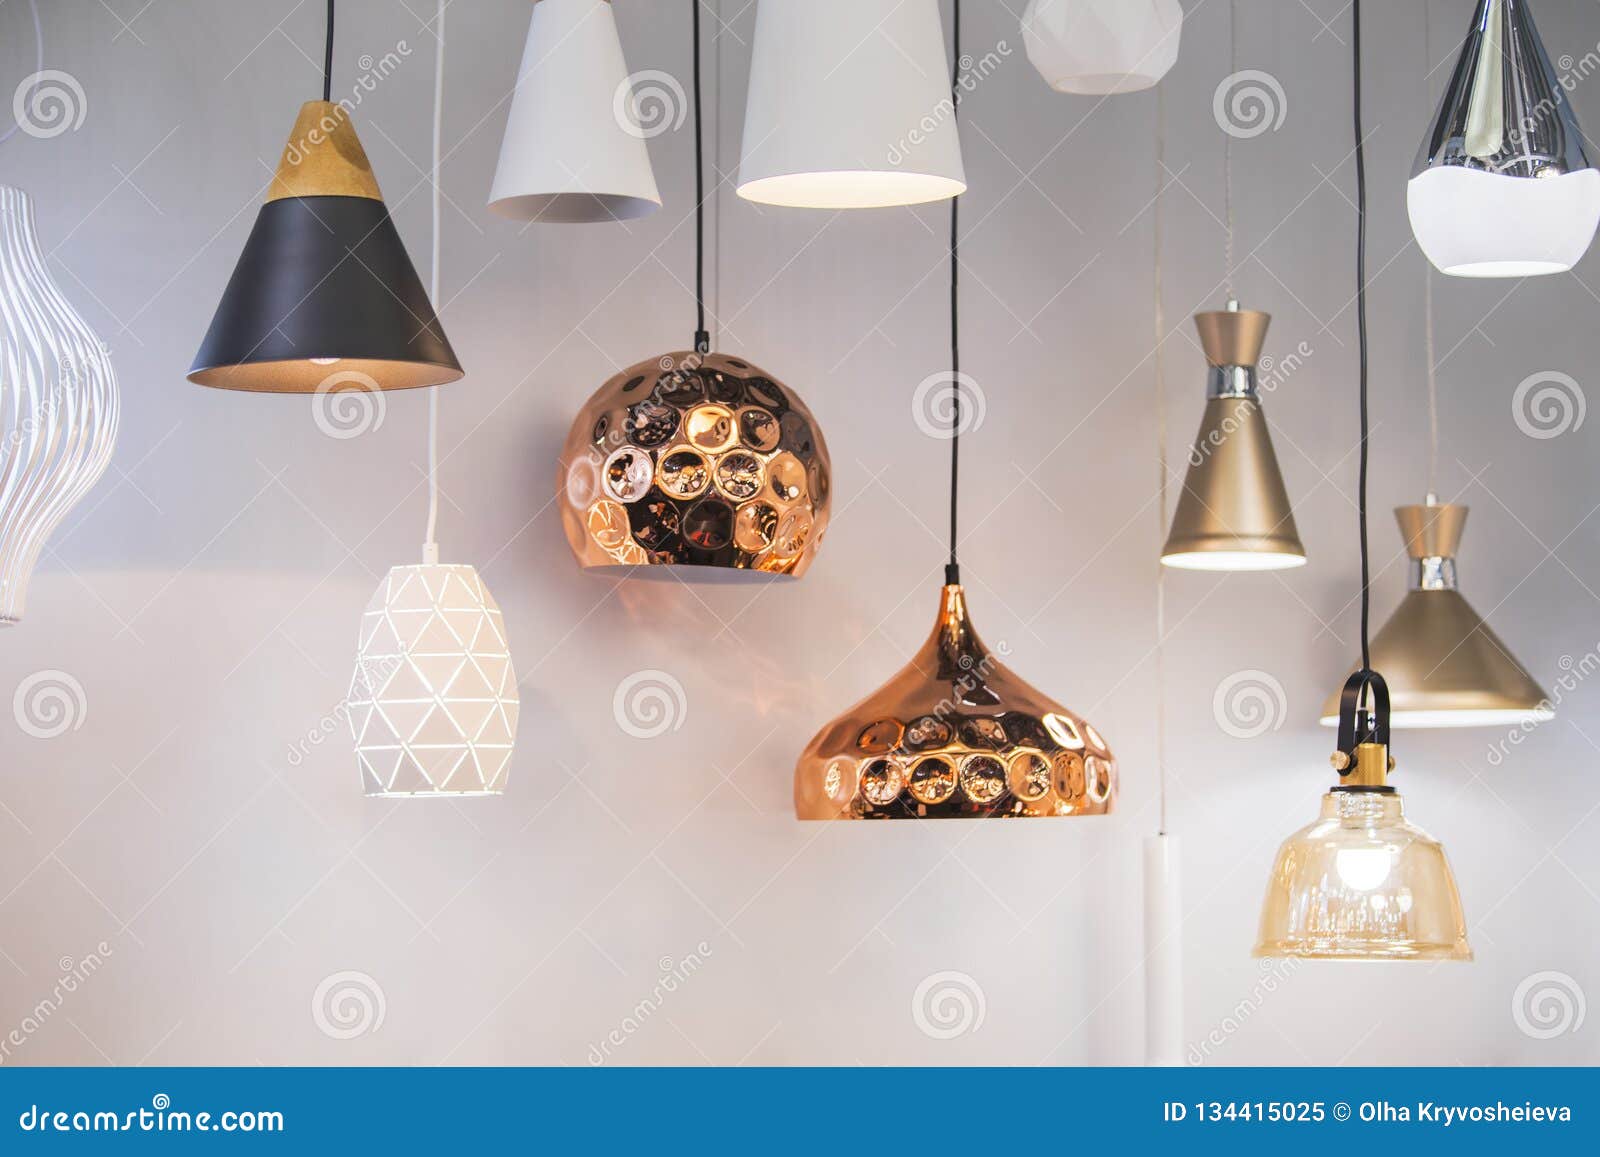 different modern streamlined mirror copper chandeliers. bubble metal copper shade pendant